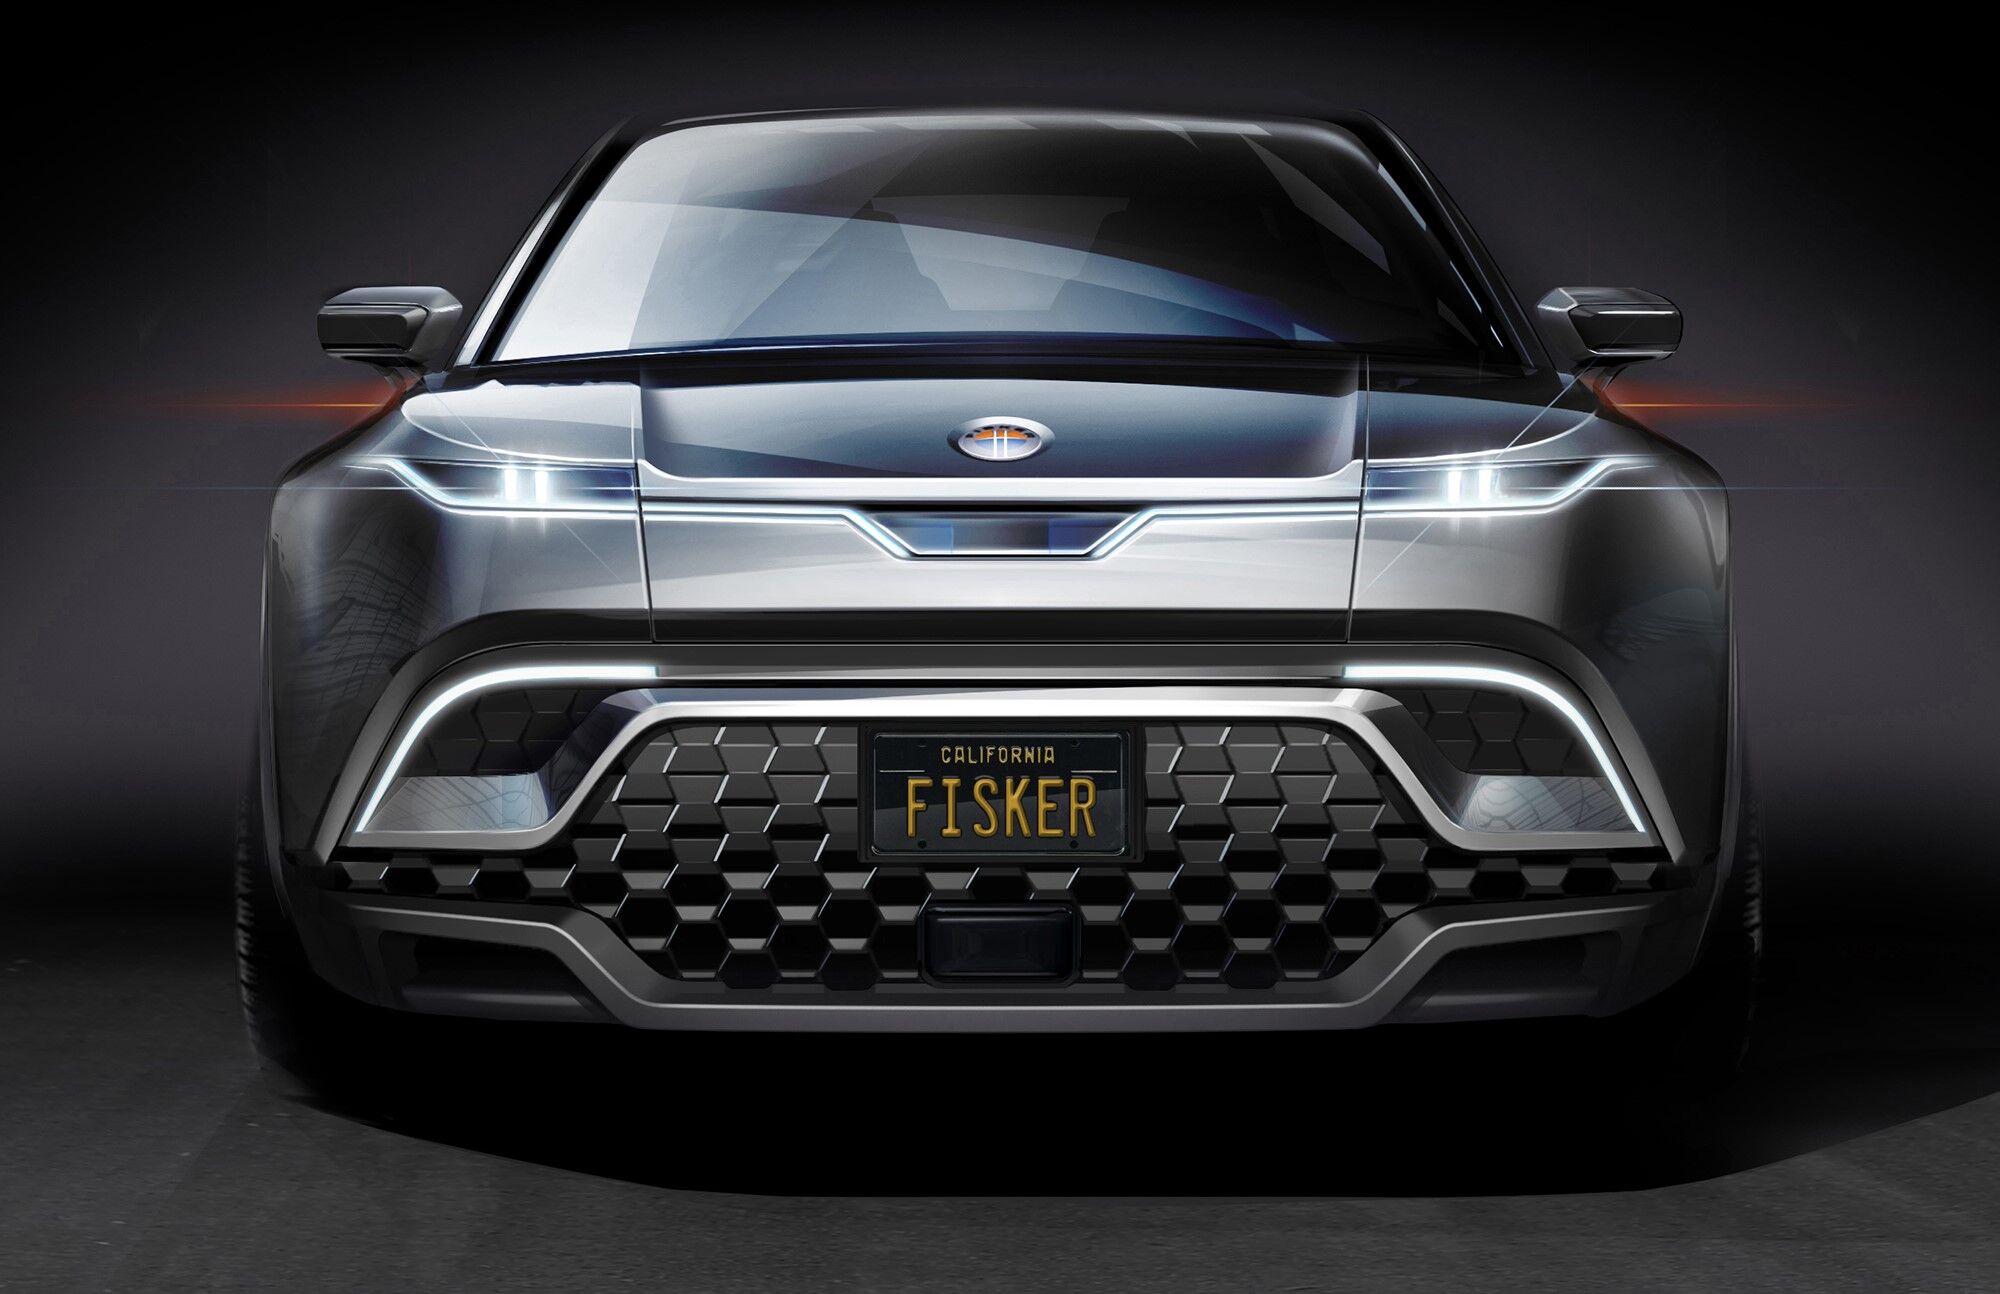 Fisker announces new sub40,000 electric SUV with 300 miles of range